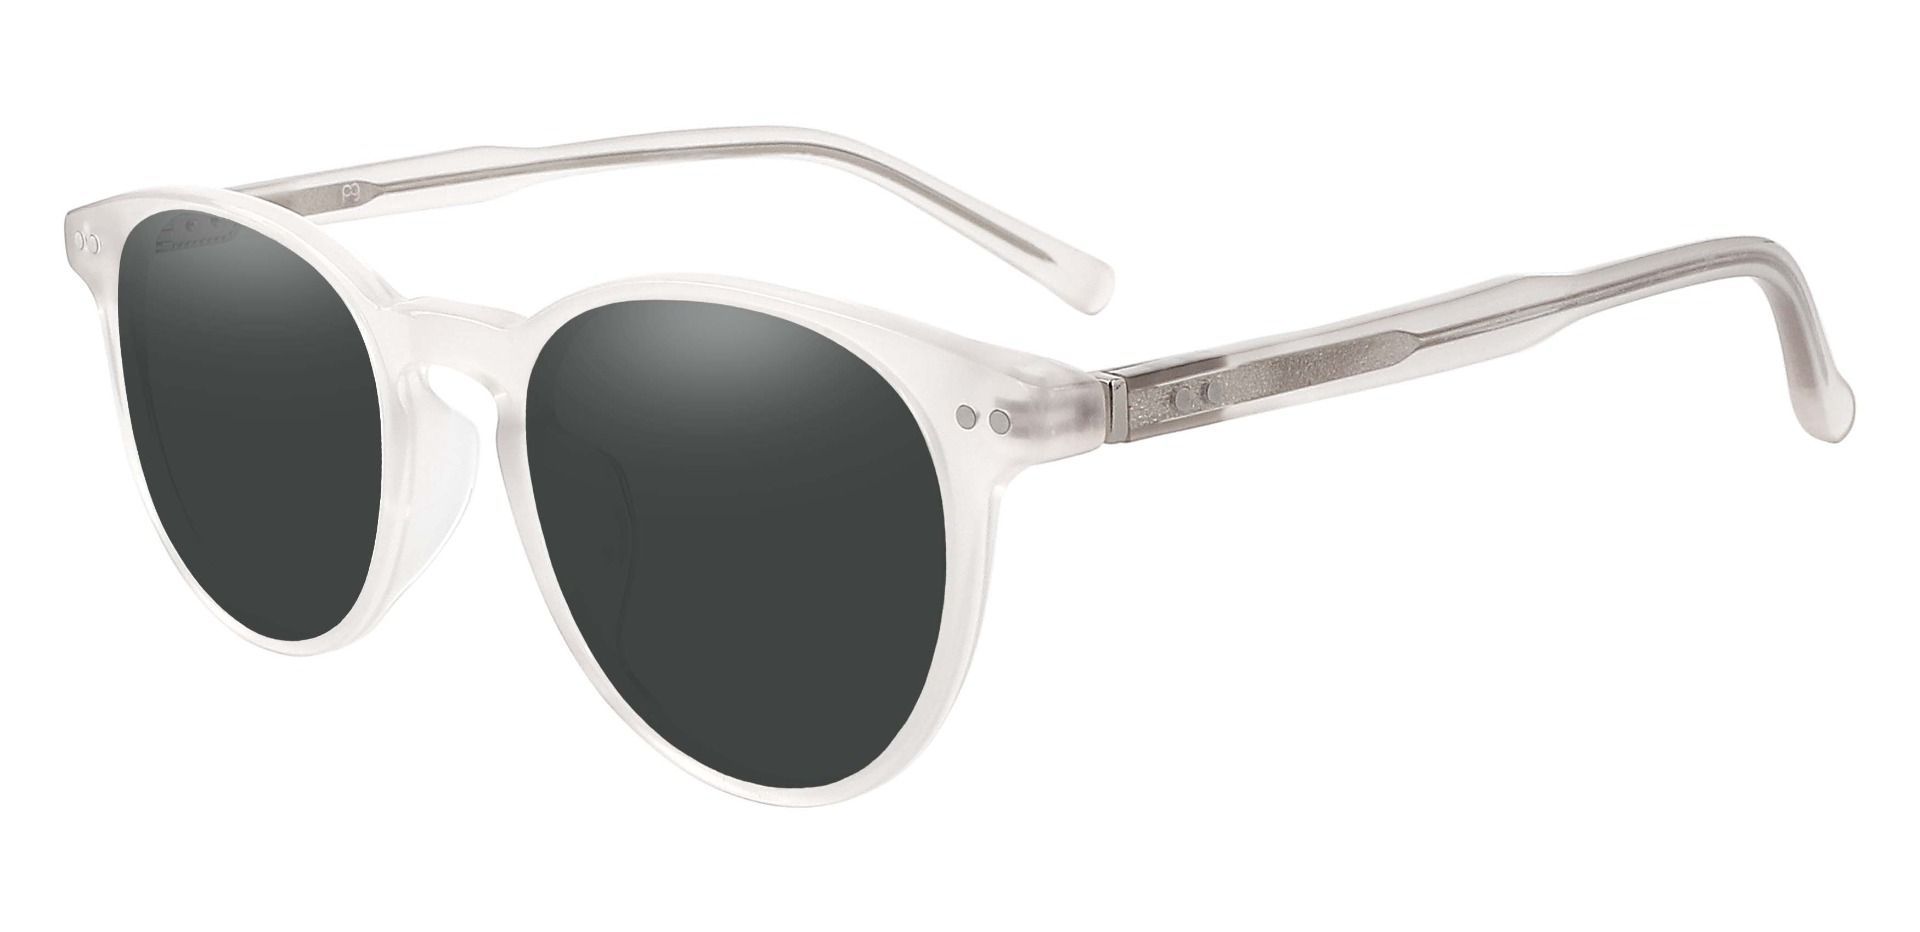 Marianna Oval Non-Rx Sunglasses - White Frame With Gray Lenses